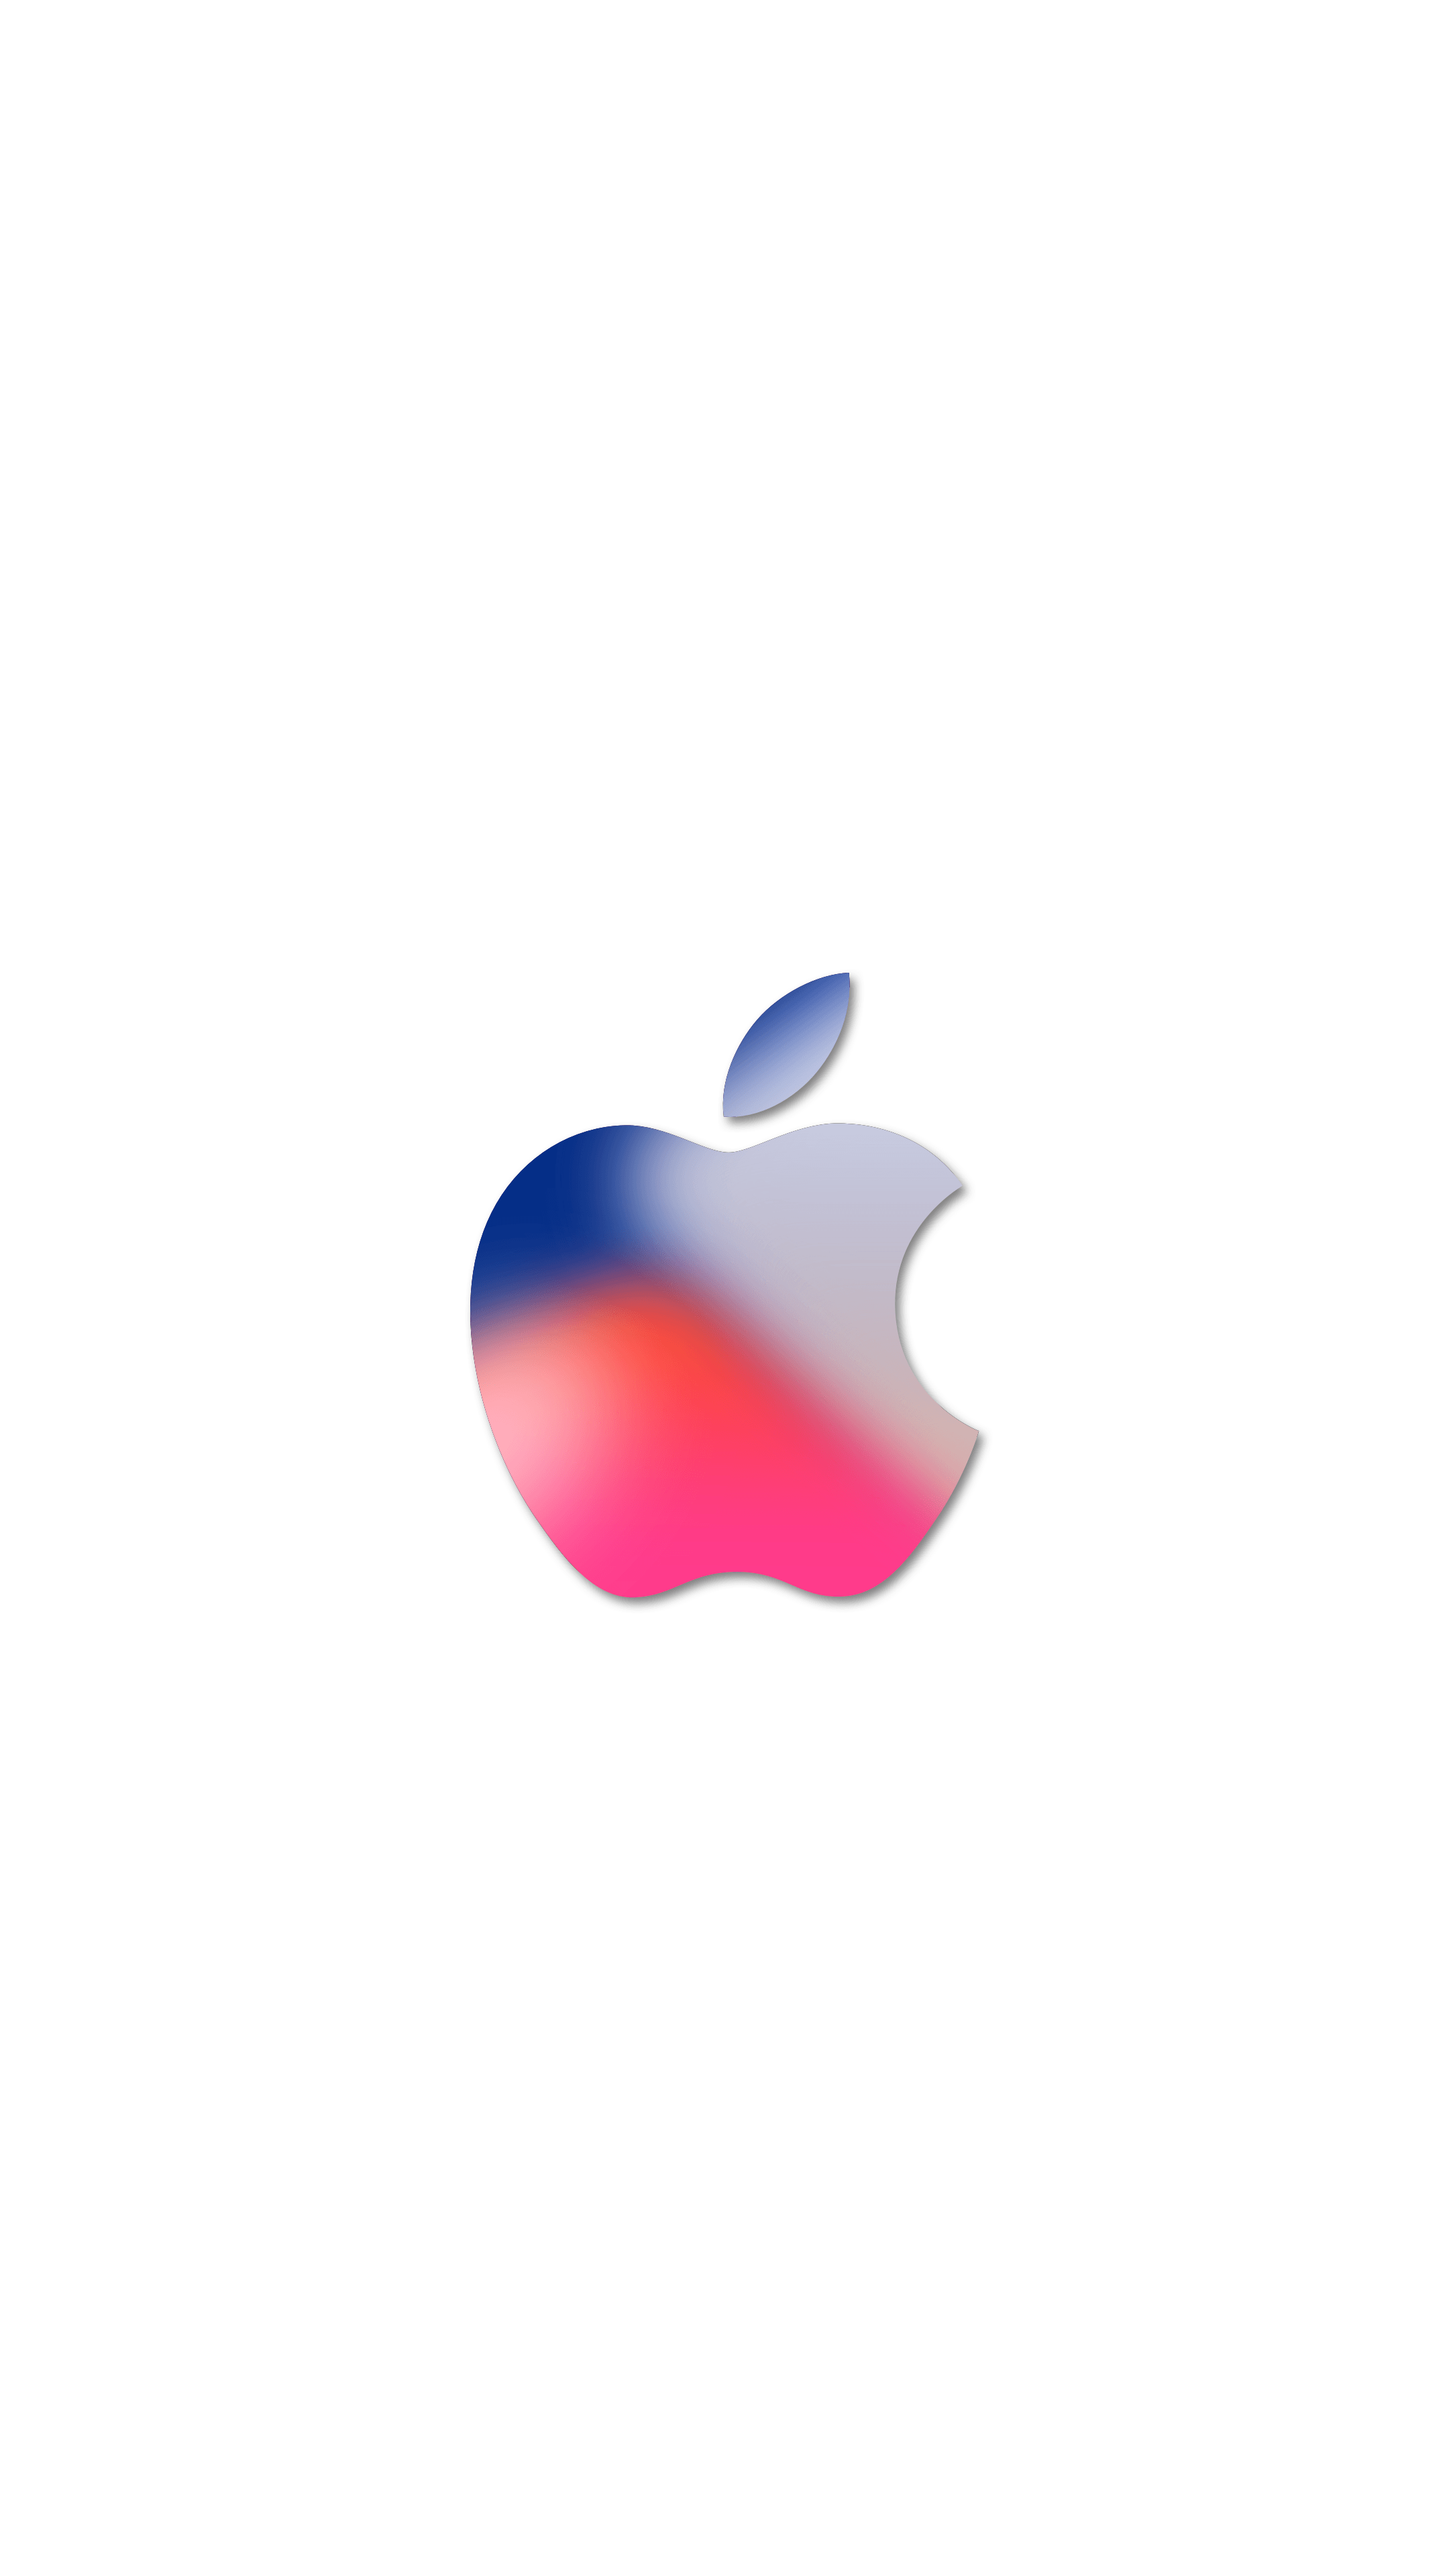 Colored Apple Logo - Download September 12 iPhone 8 Event Wallpapers For iPhone, iPad and ...